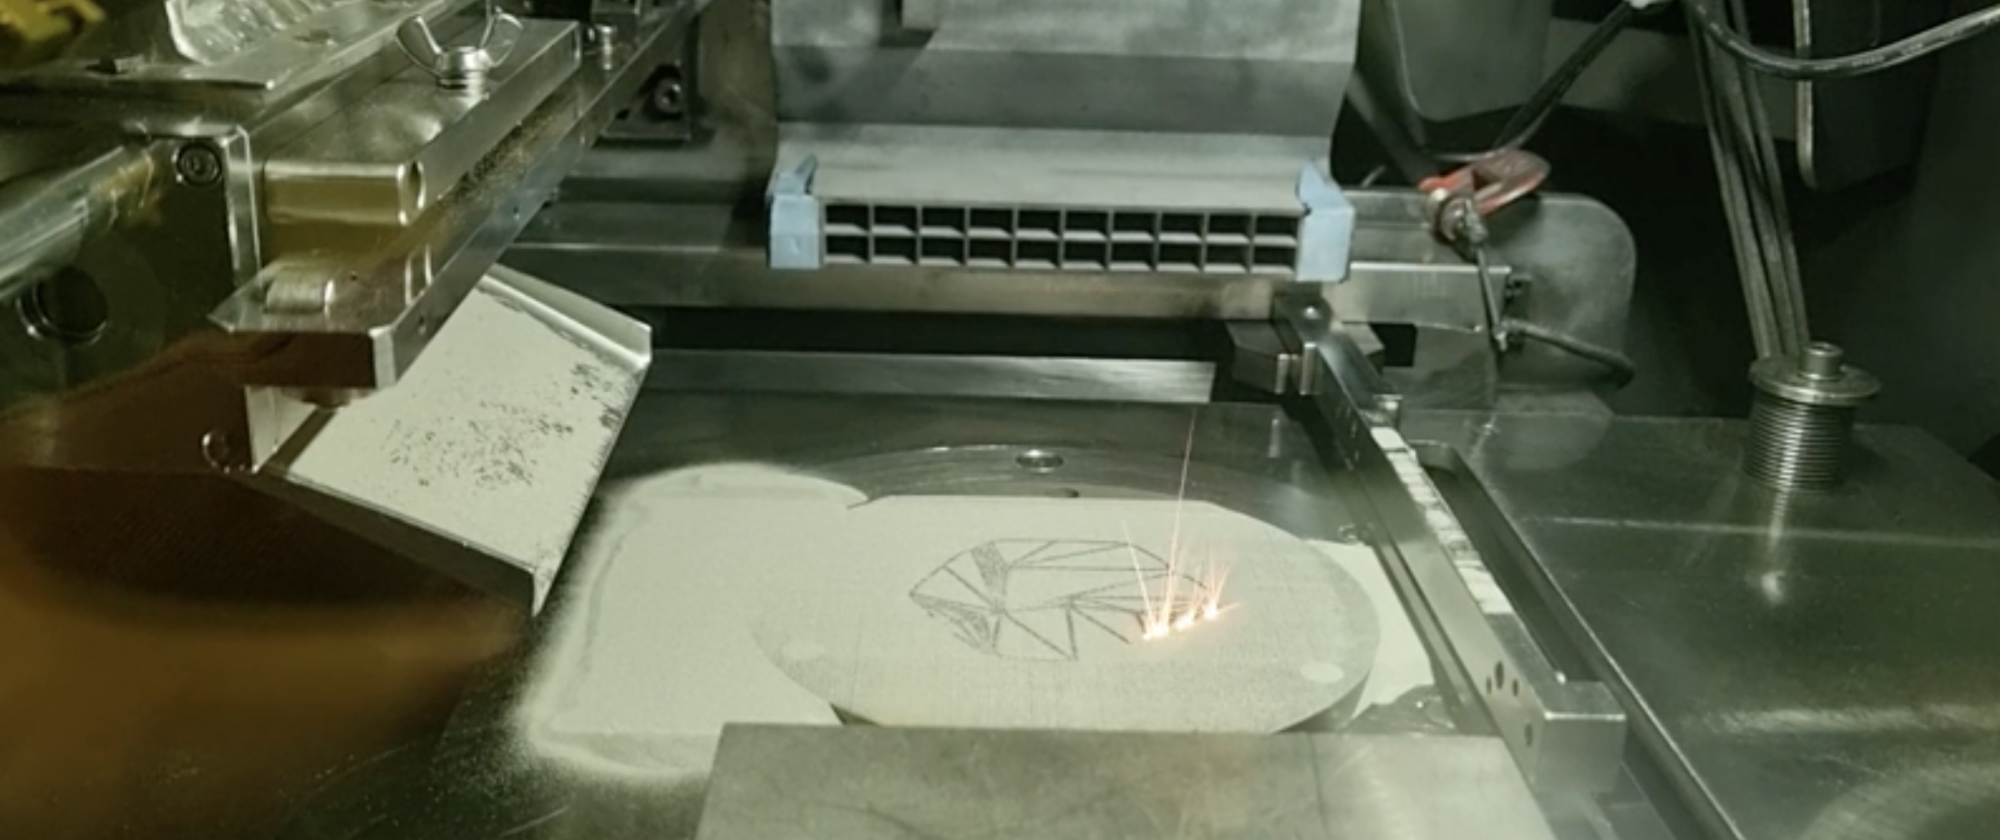 Footage showing laser powder bed fusion of a powder layer of stainless steel 316L in the custom-made machine “AddME Printer” at NTU in Singapore. Part design and video capturing by Jude E. Fronda.